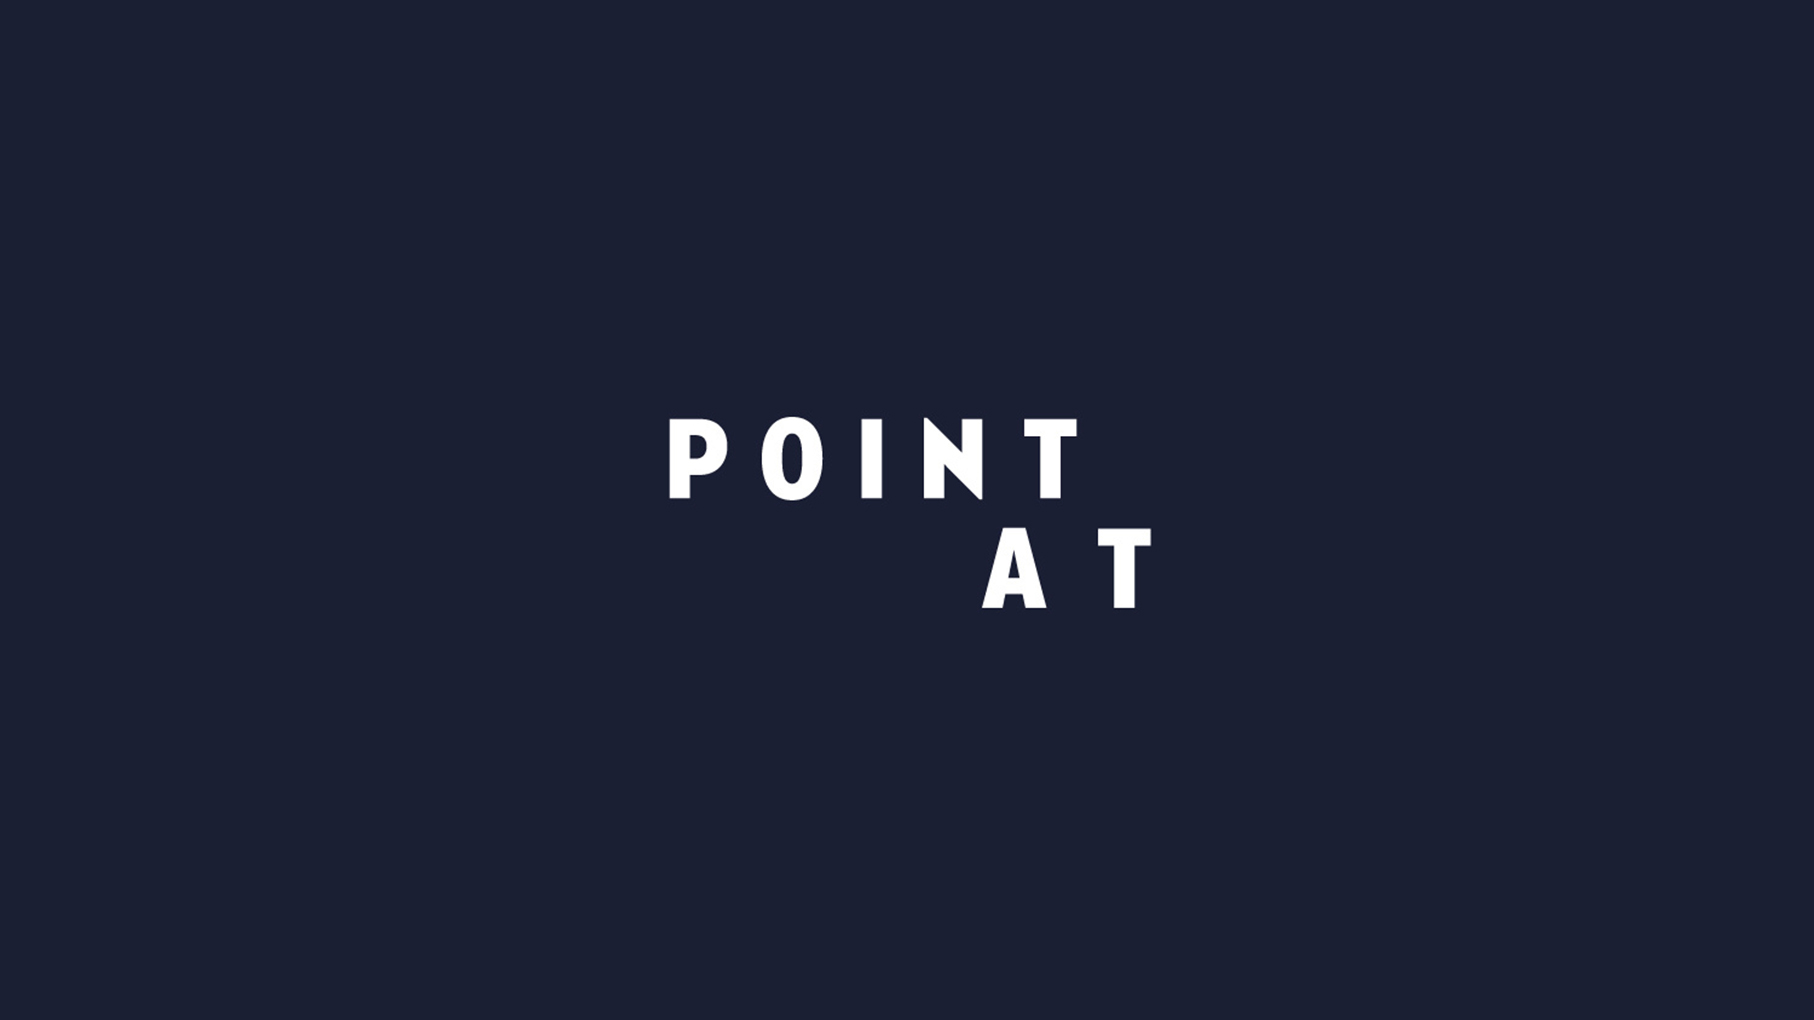 Point at